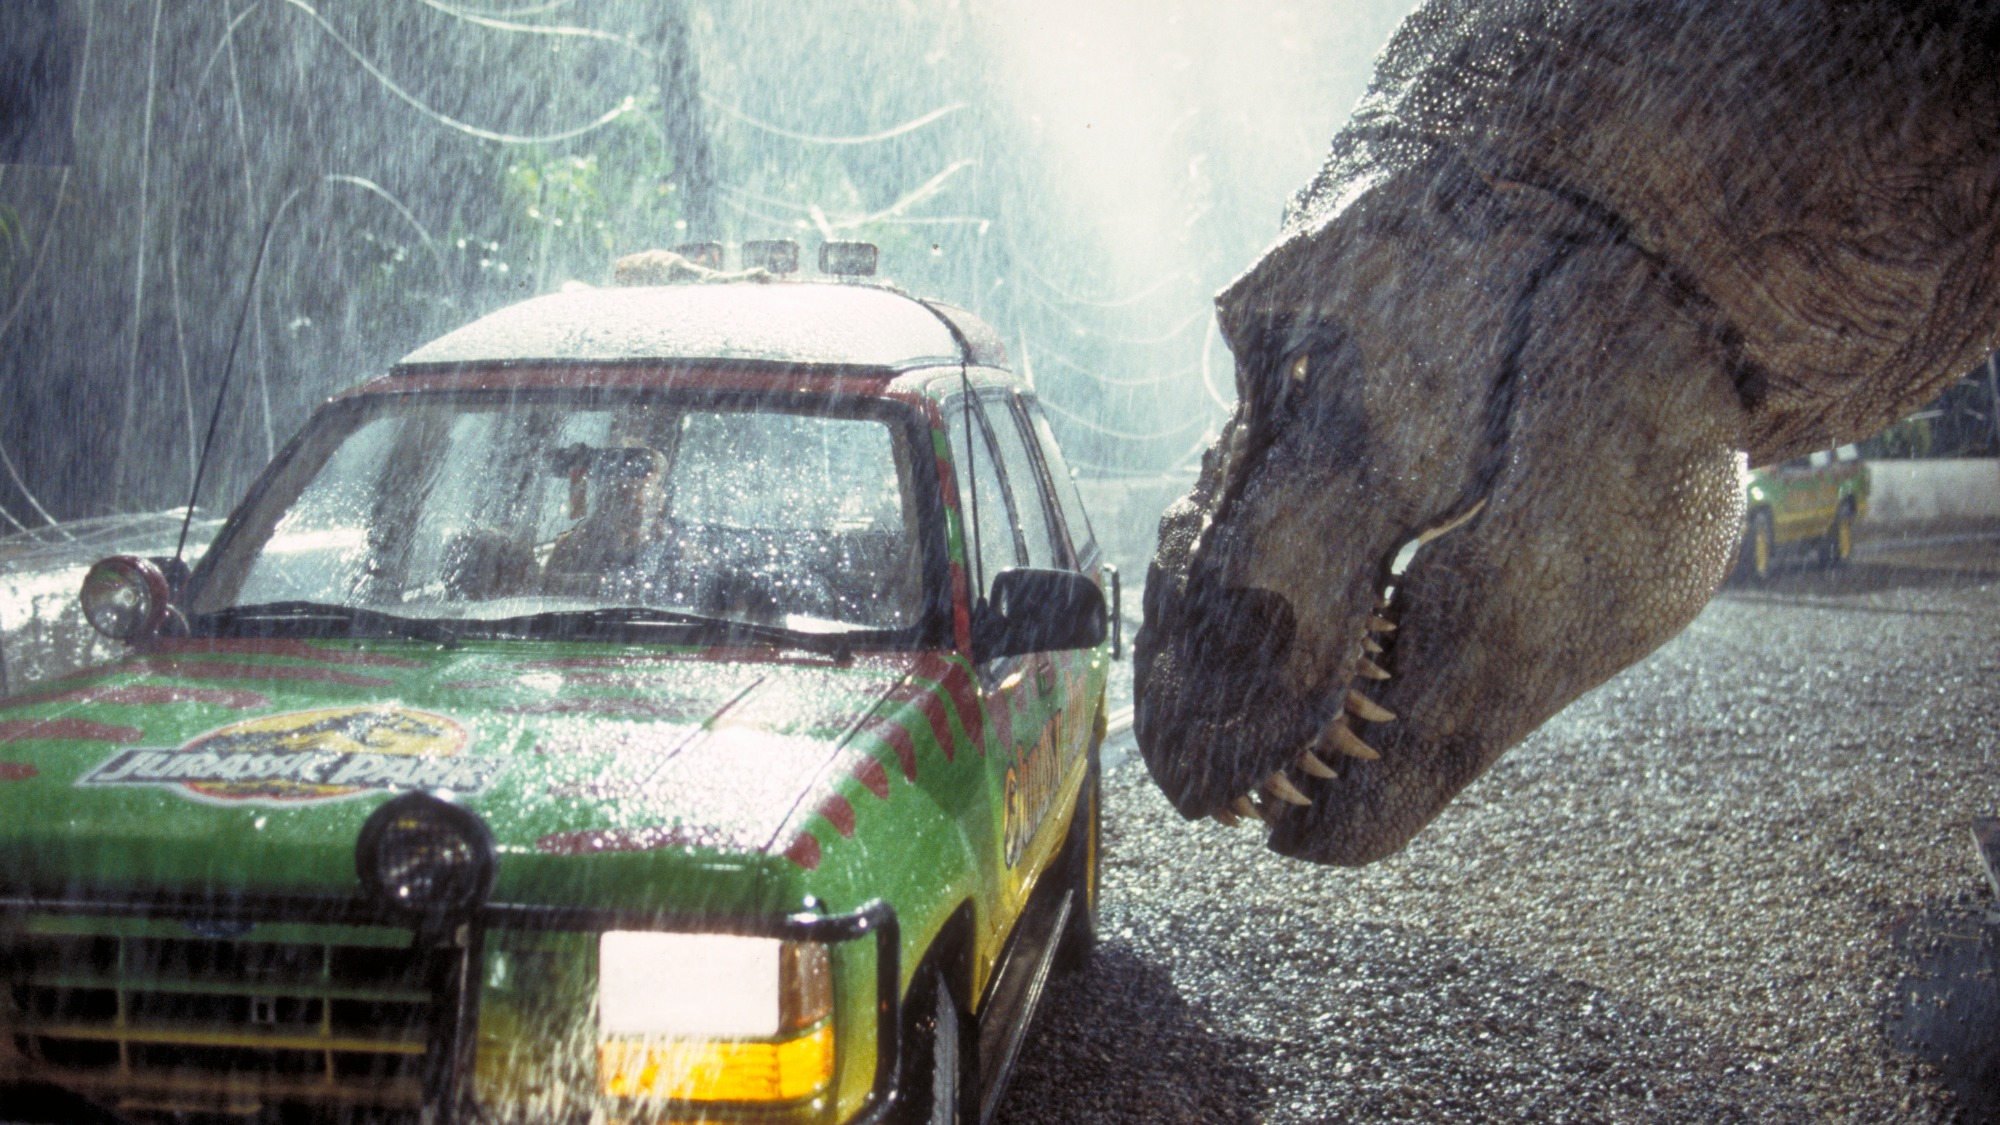 Celebrate Jurassic Park's birthday with new dino finds | Popular Science